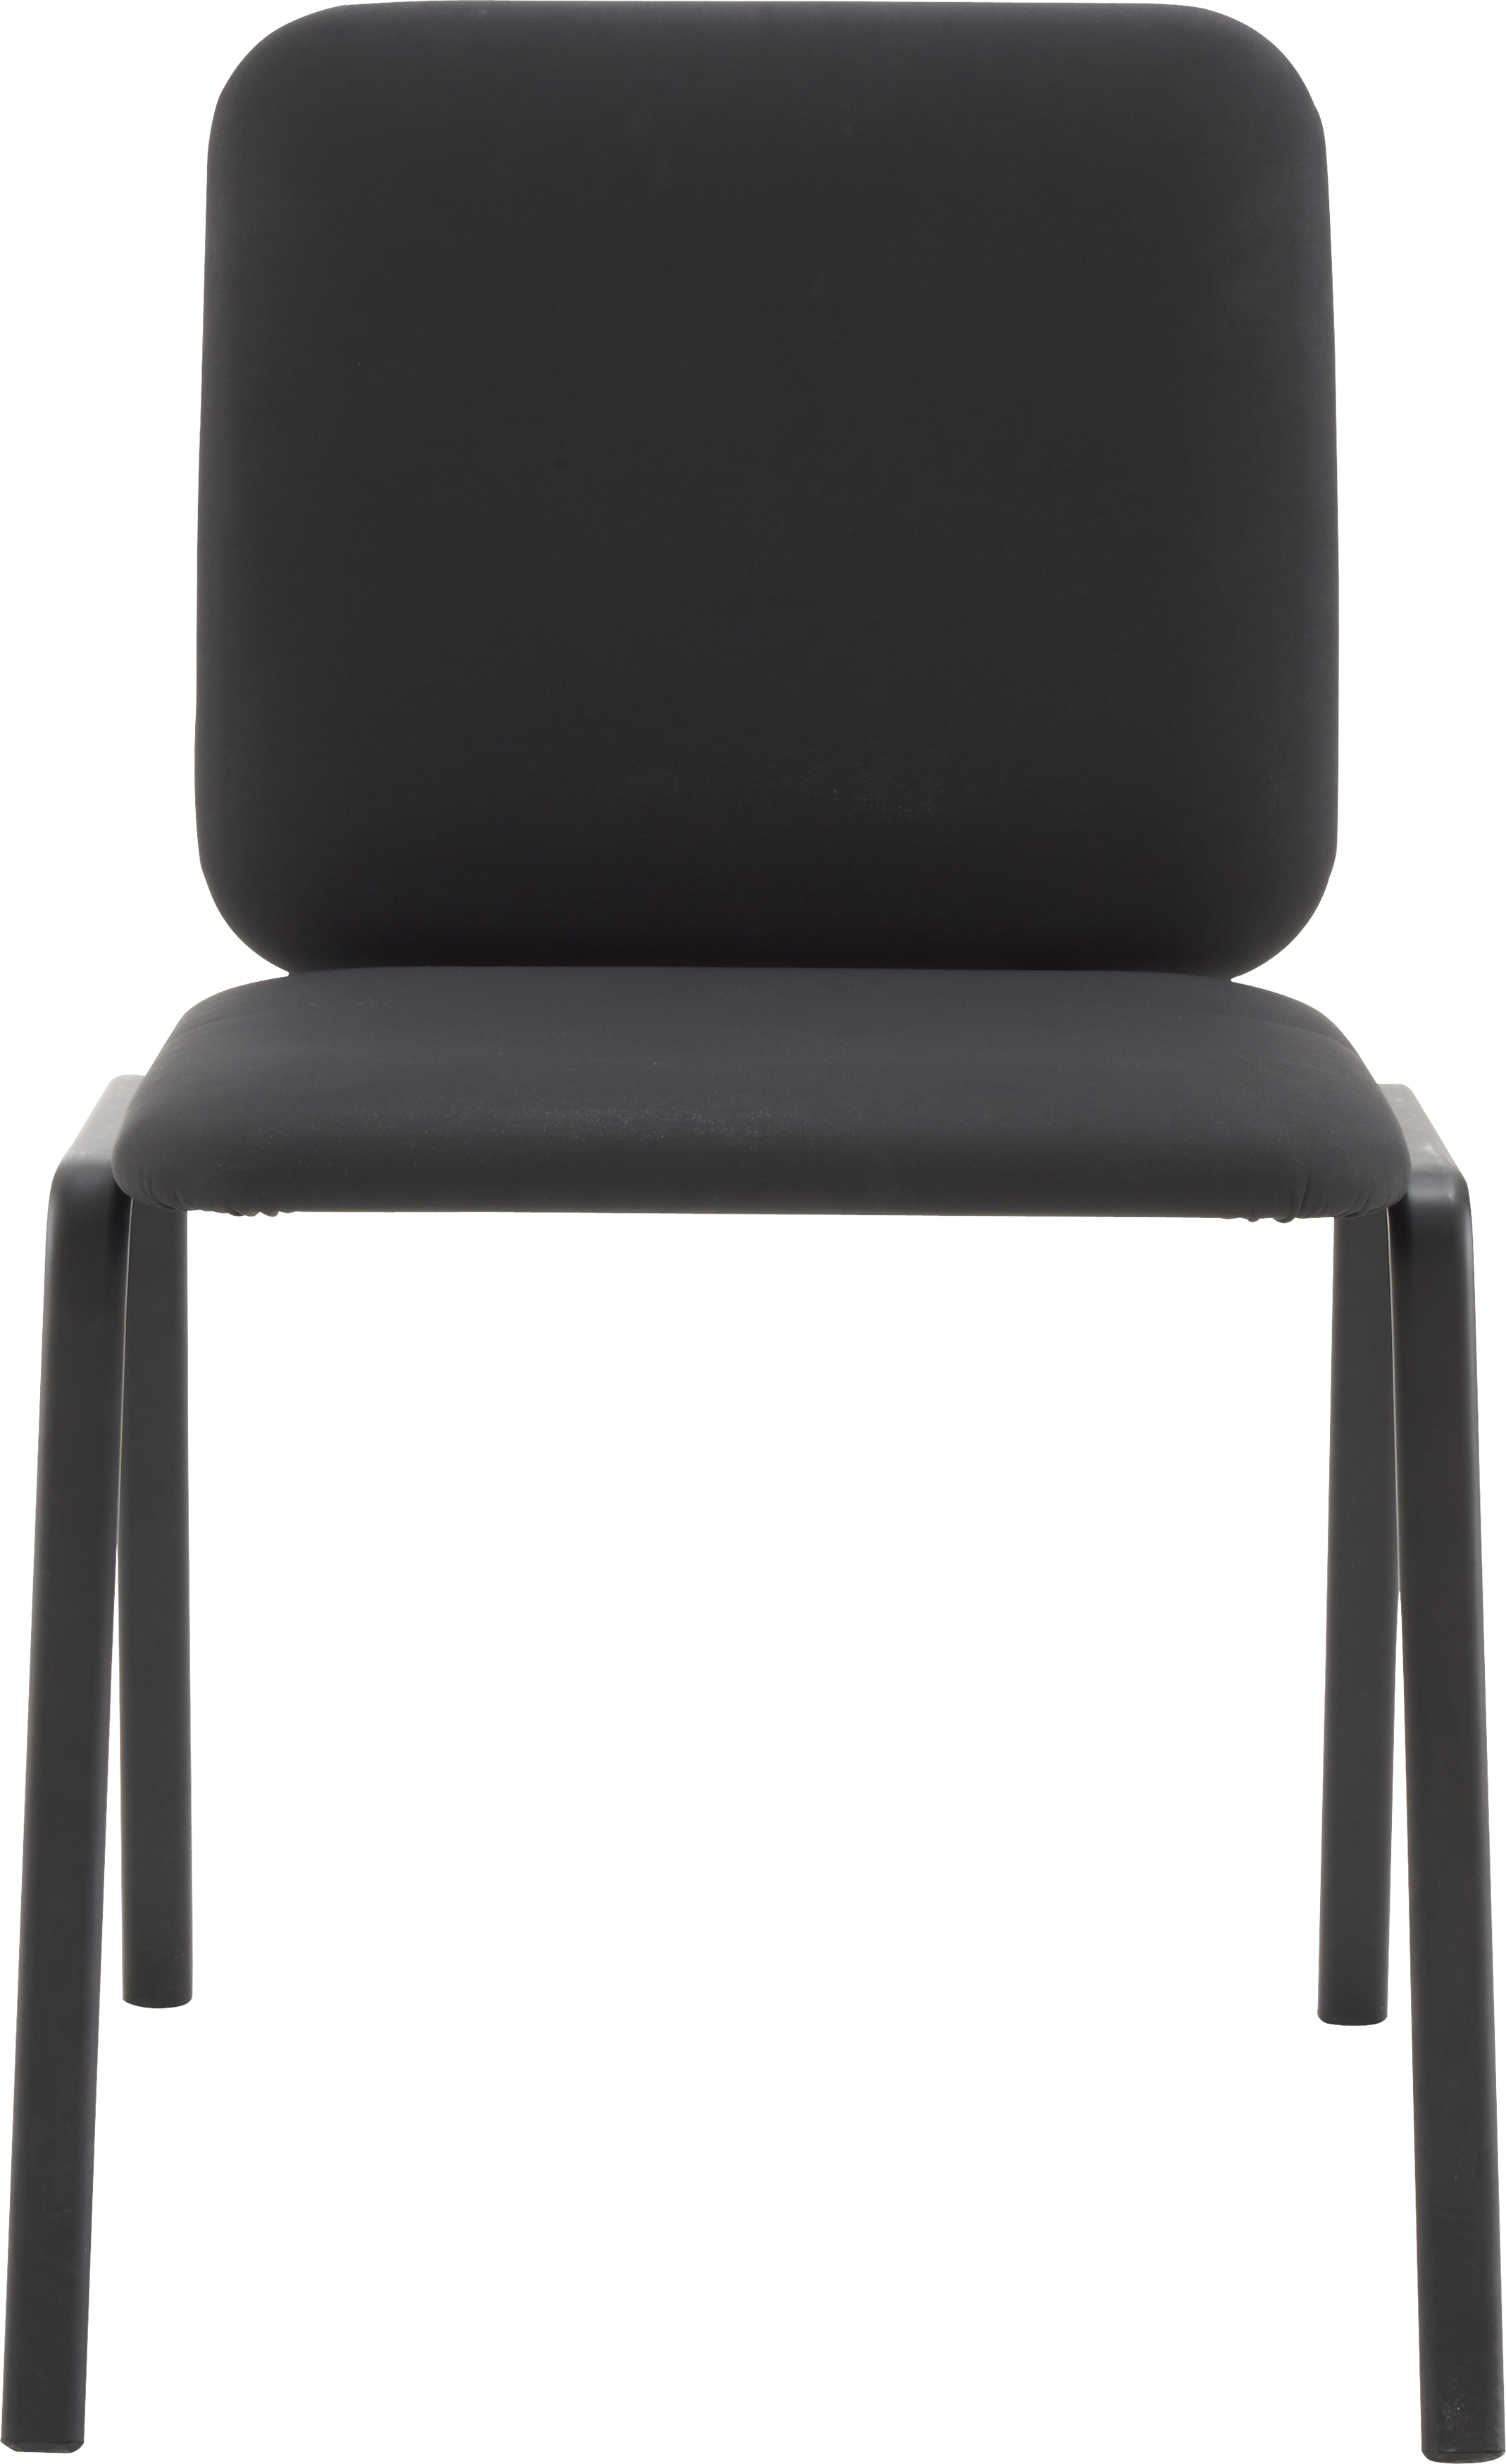 Simple Chair PNG HD  pngteam.com